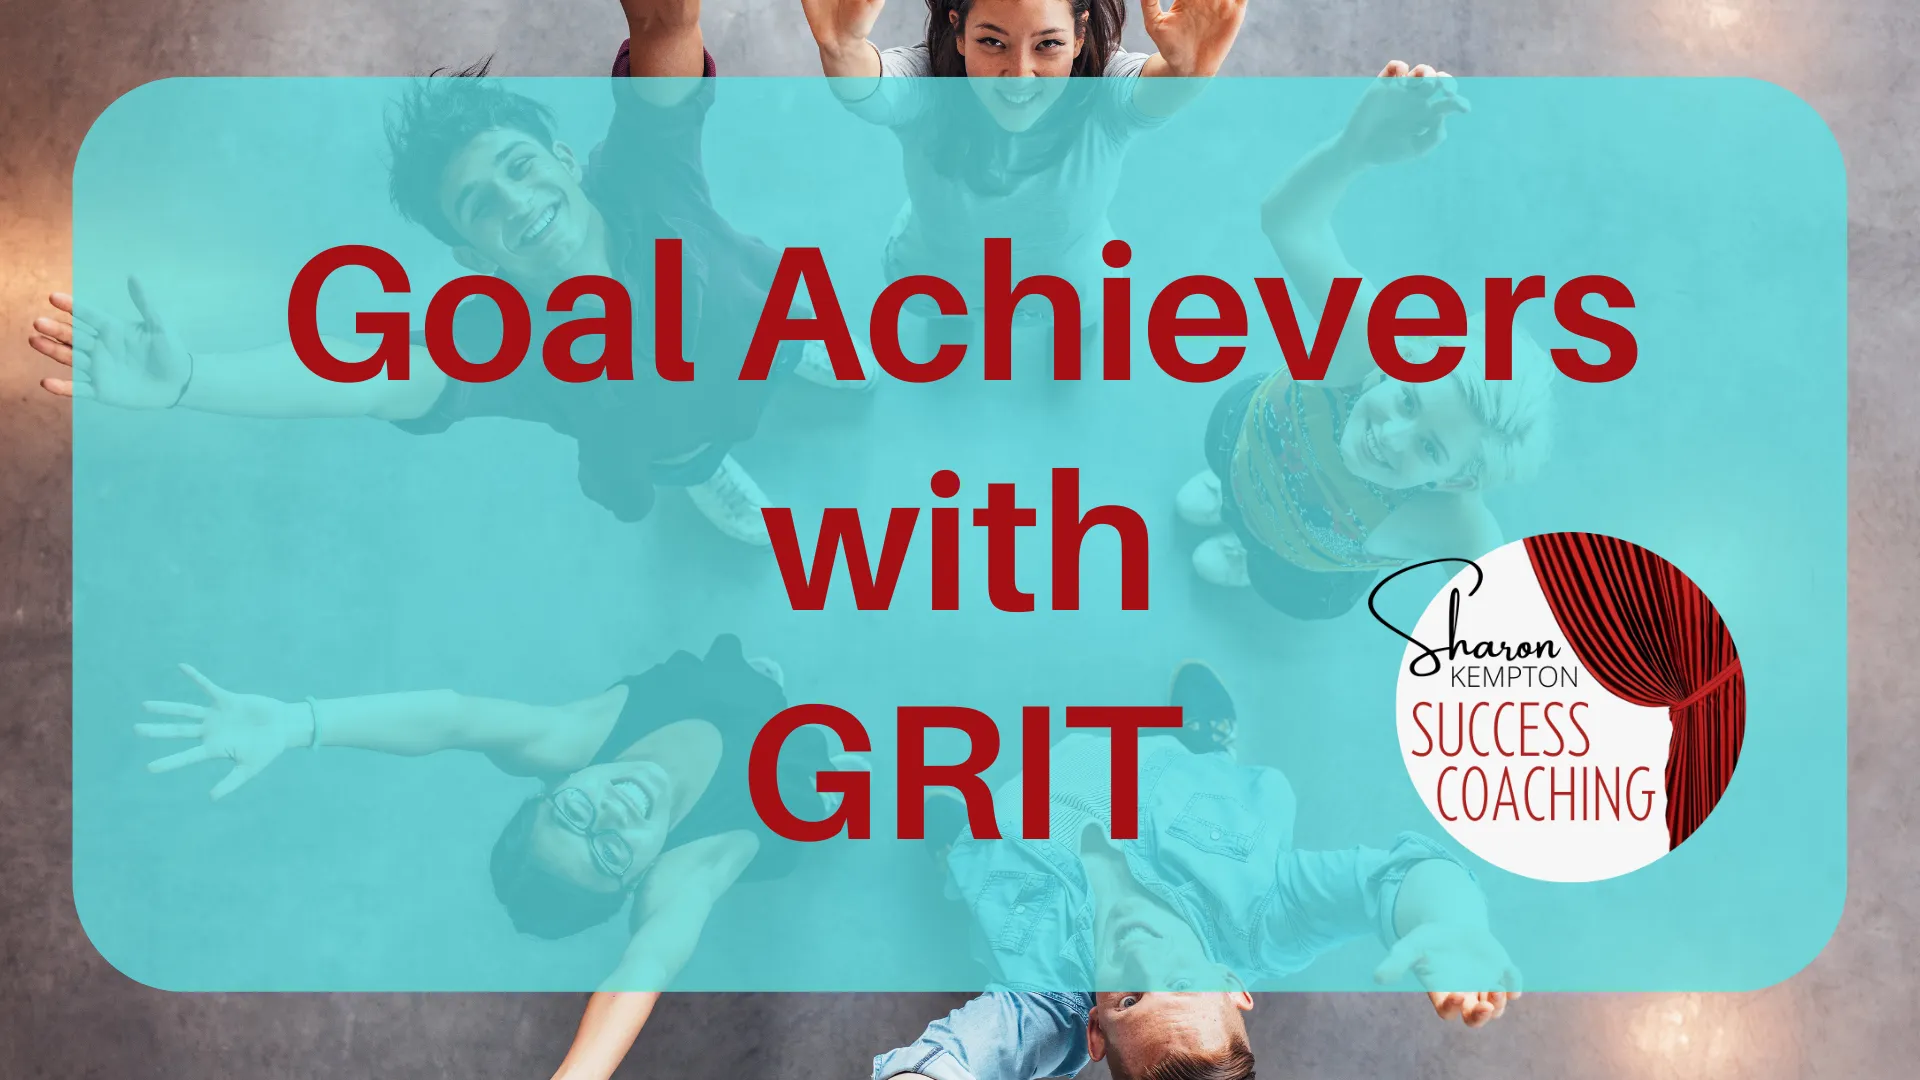 Goal Achievers with GRIT